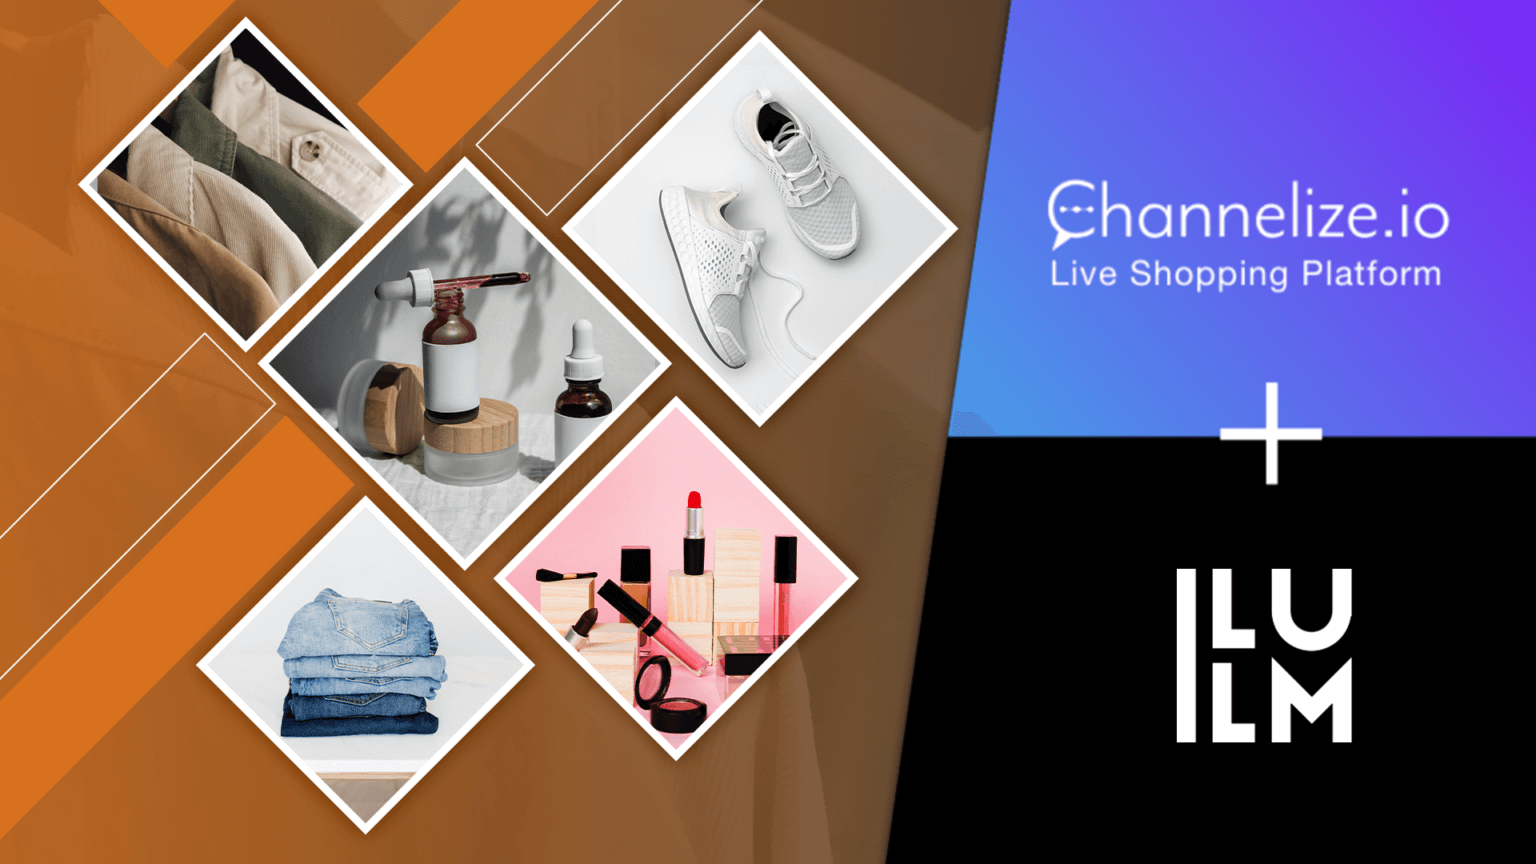 ILLUM turned to Channelize.io Livestream Shopping Platform for selling Luxury Products